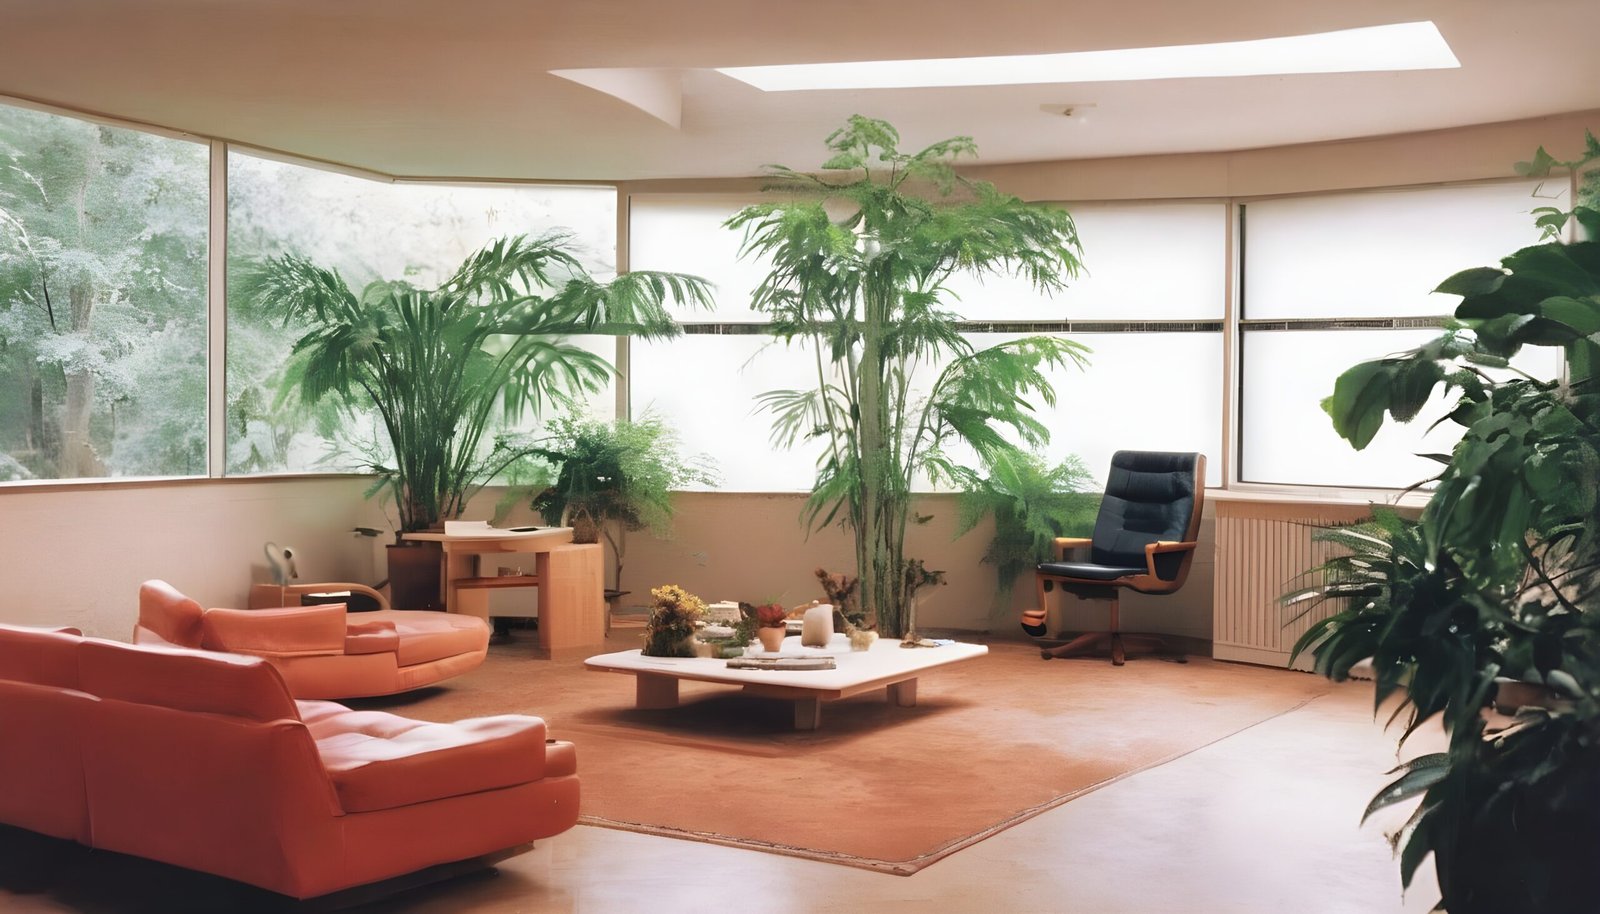 1980s biophilic living room with orange couches and lots of greenery.